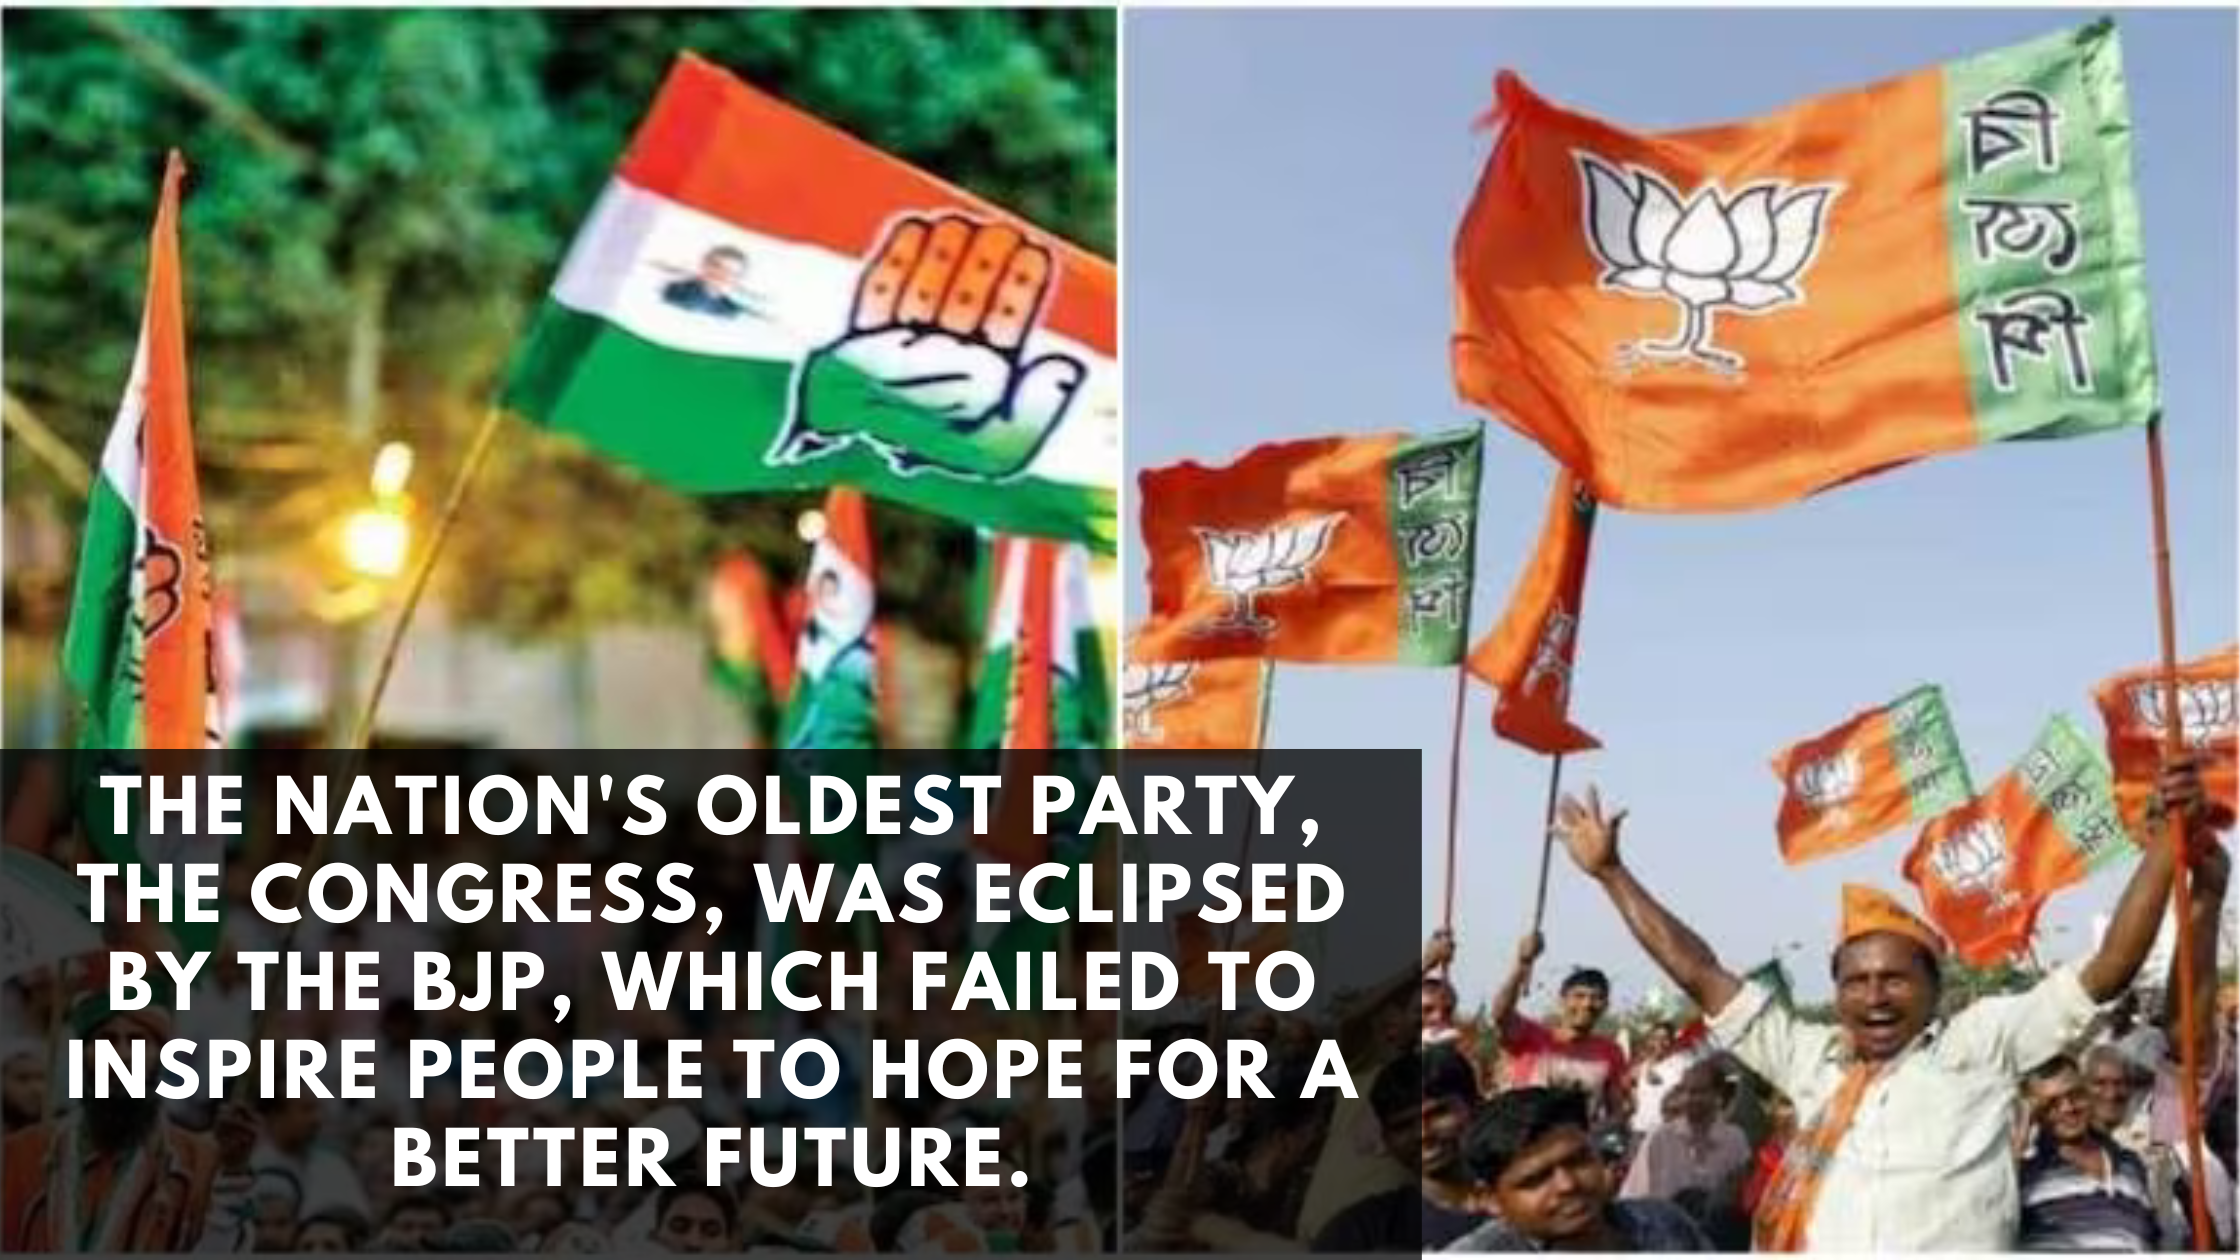 The nation's oldest party, the Congress, was eclipsed by the BJP